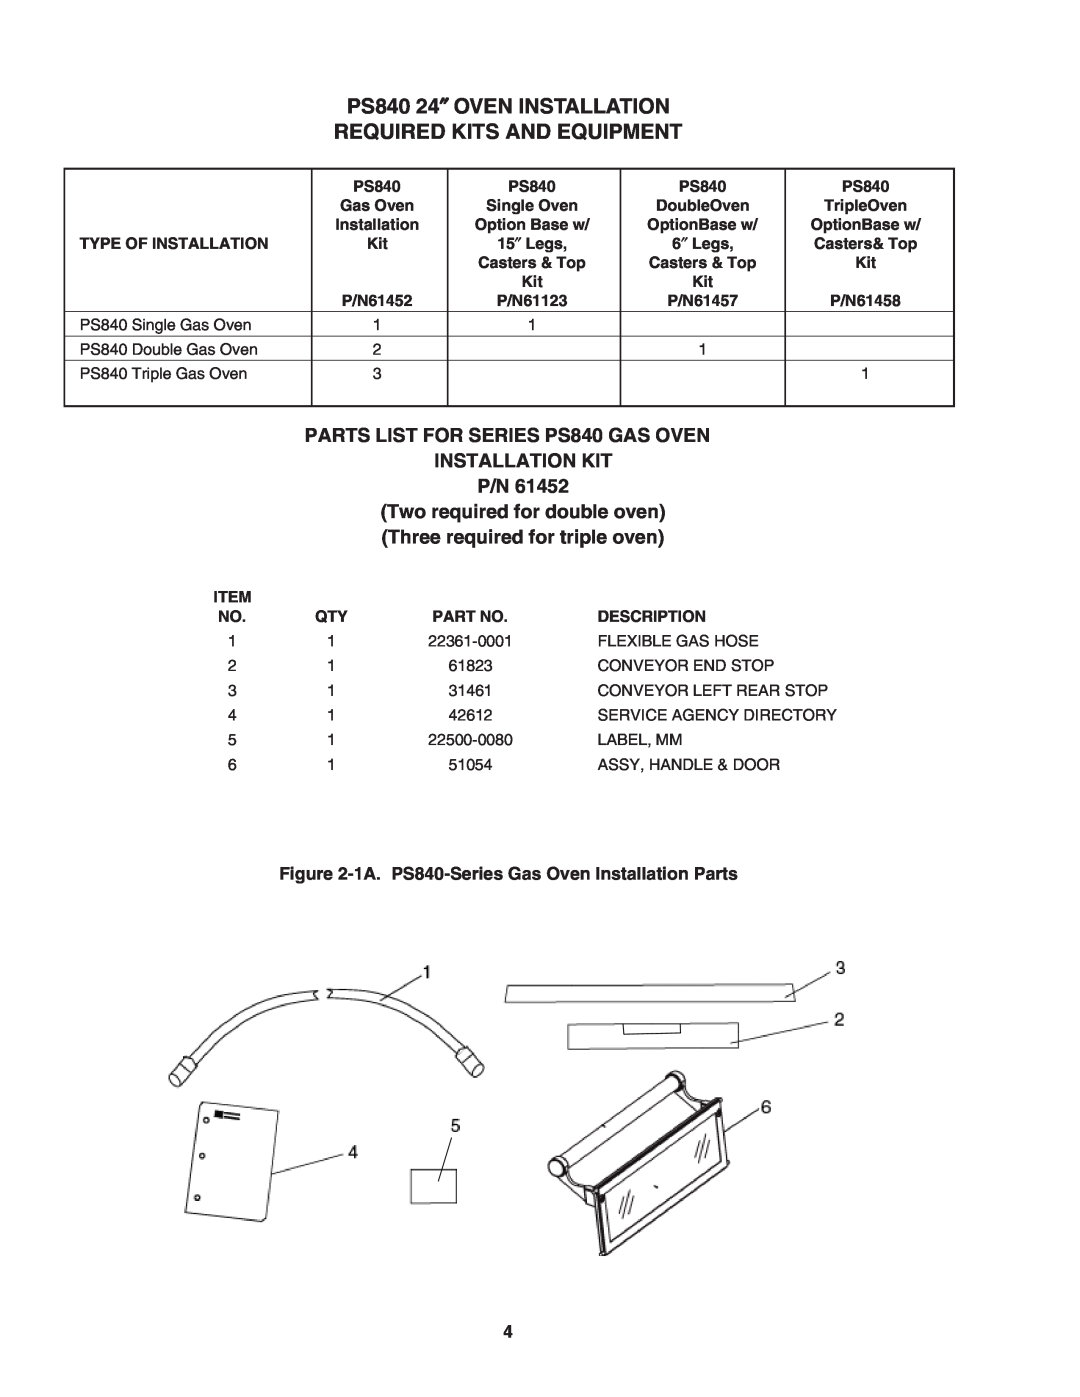 Middleby Marshall PS840 Series installation manual PS840 24″ OVEN INSTALLATION REQUIRED KITS AND EQUIPMENT 